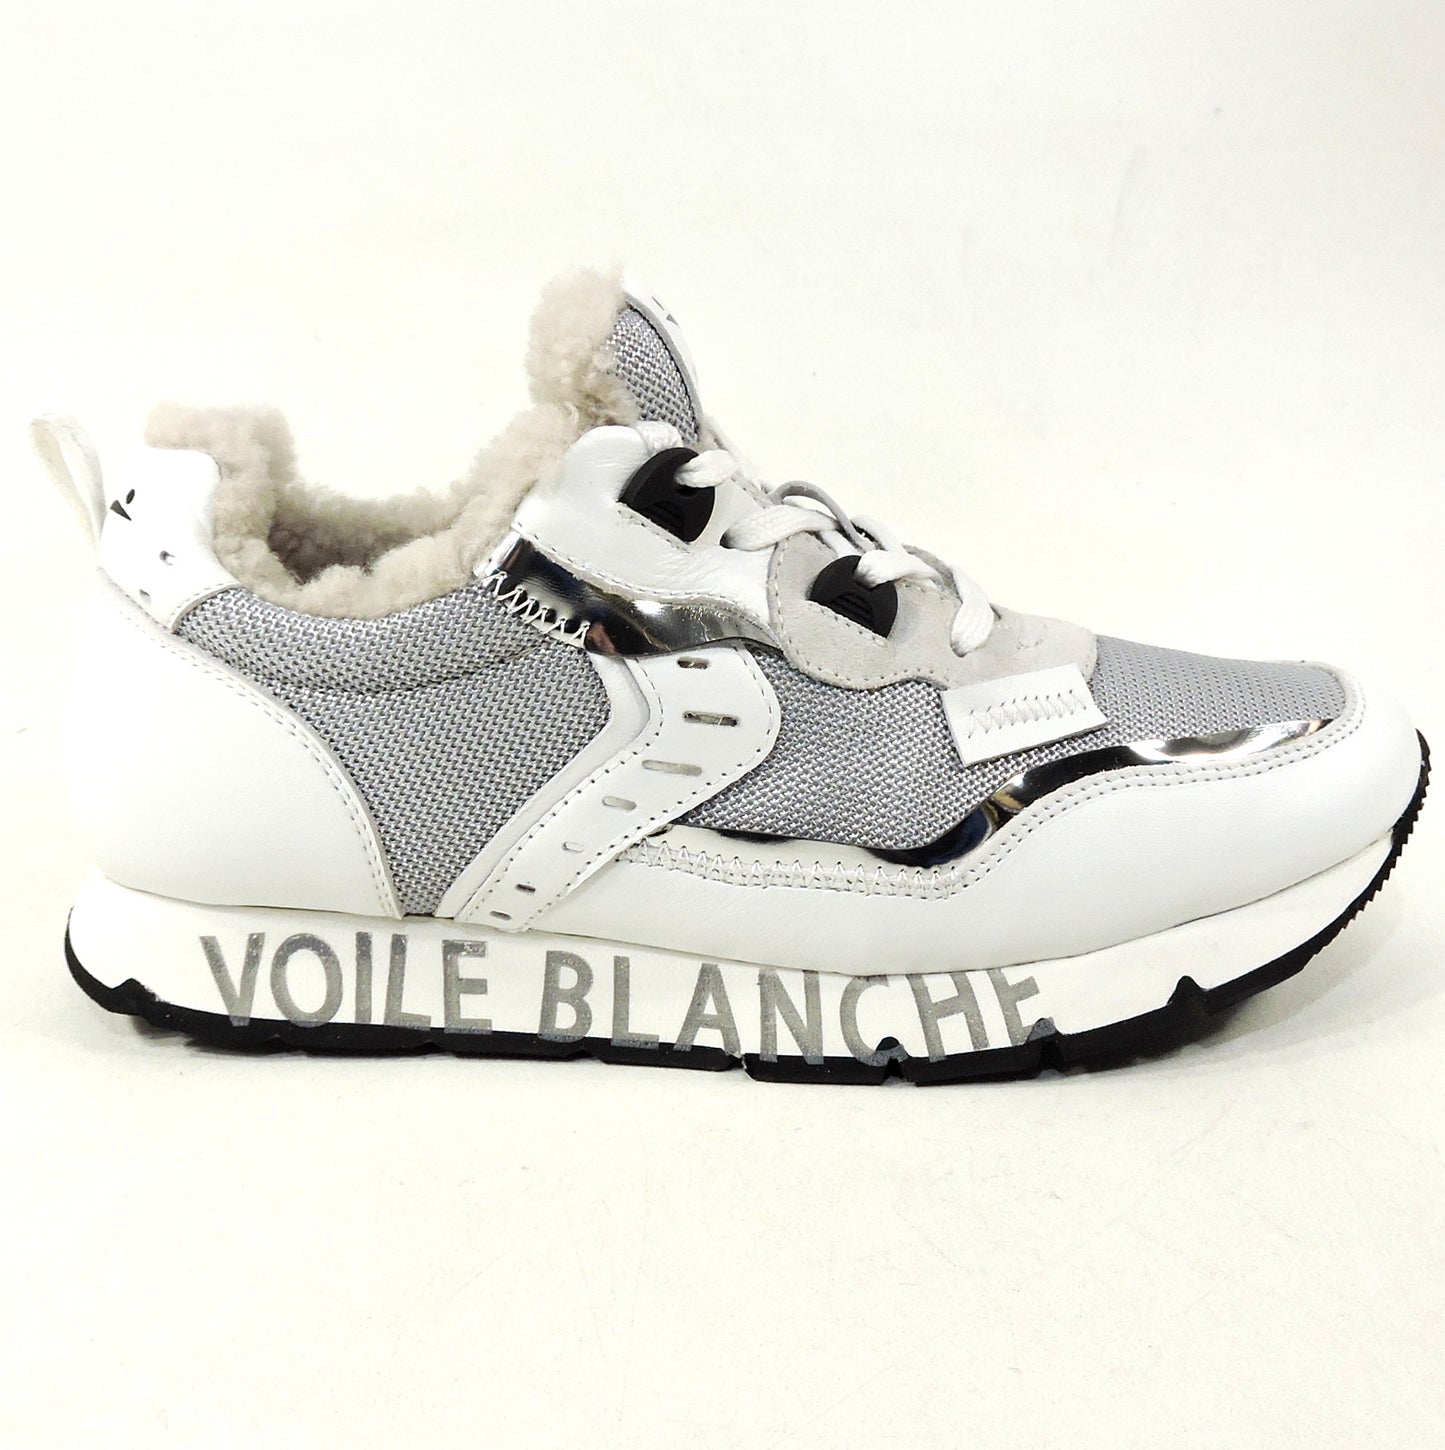 VOILE BLANCHE 🇮🇹 WOMEN'S WHITE LEATHER COMFORT FASHION SNEAKERS BOUTIQUE